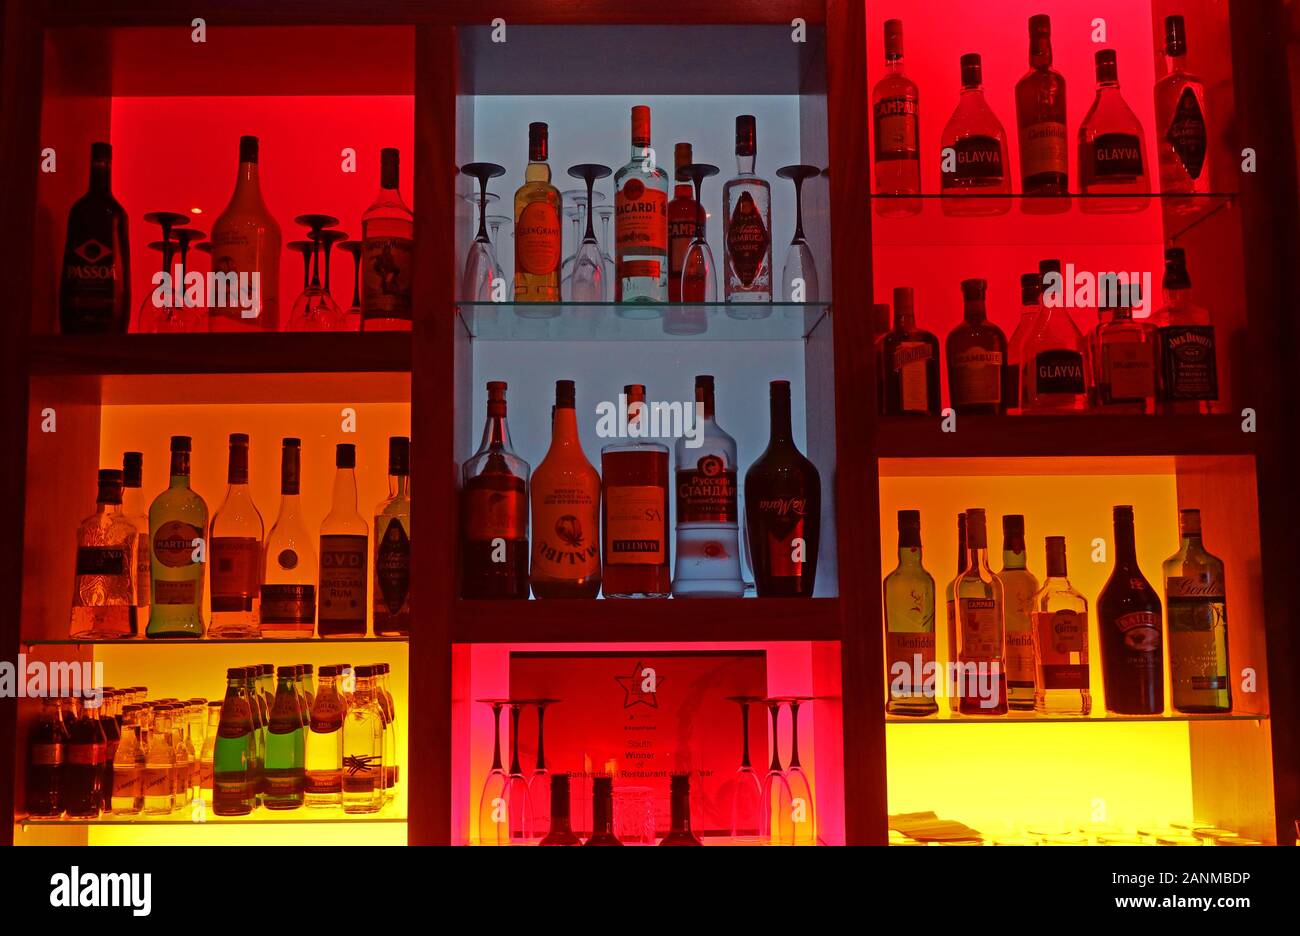 Alcohol spirits for cocktails on a multicoloured backlit bar, Gin, Whisky, Vodka, Brandy, Liquors and bitters / mixers Stock Photo